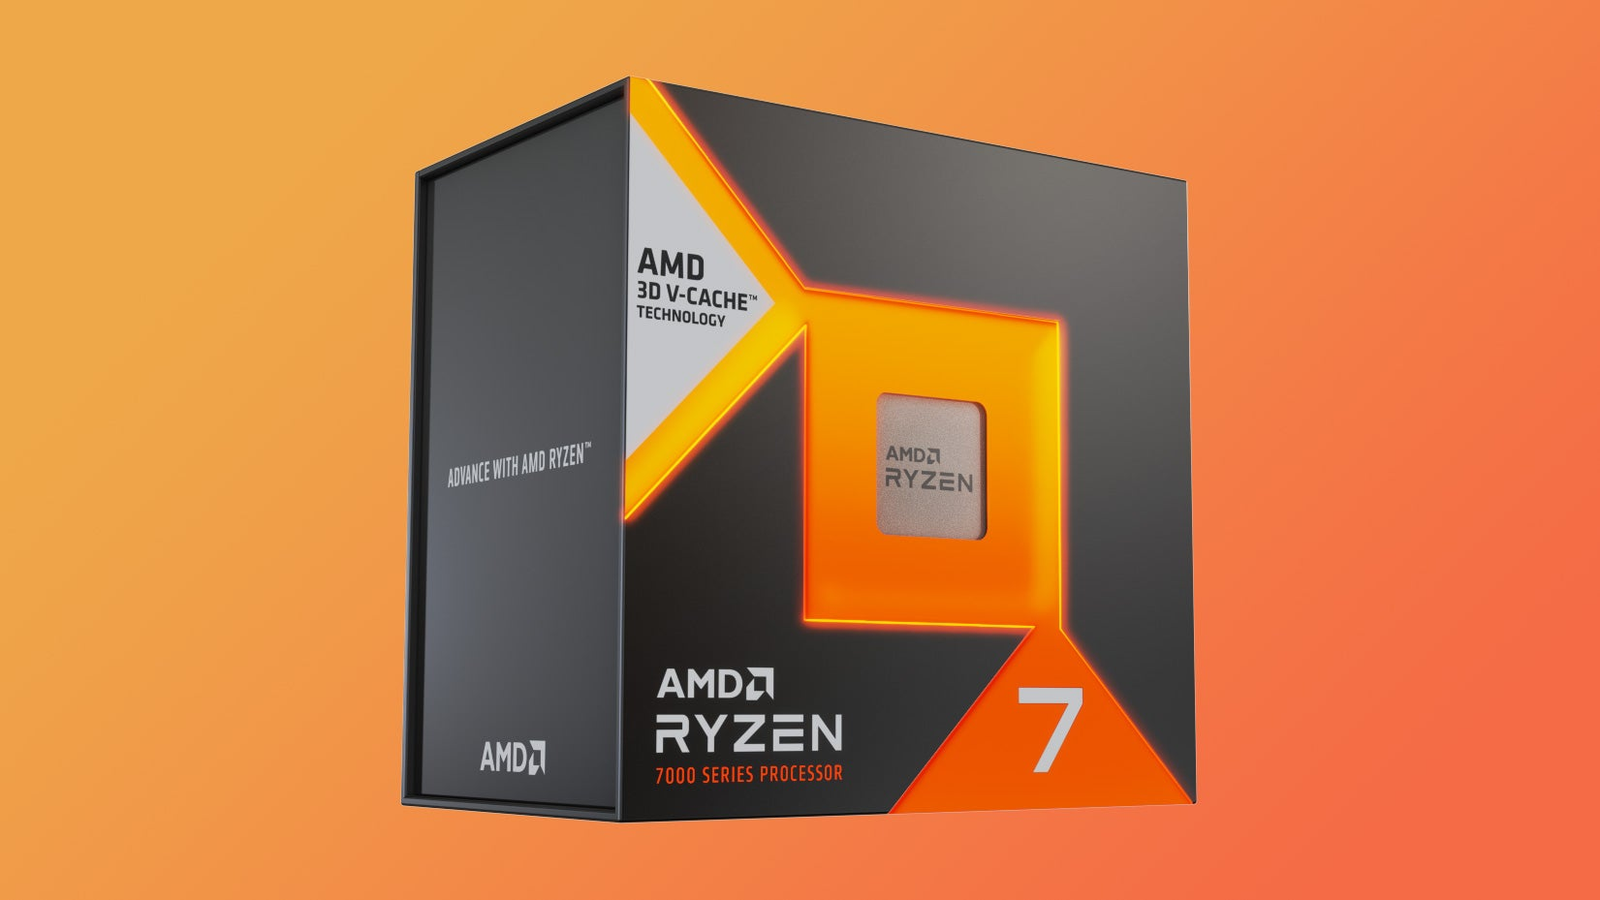 AMD Ryzen 7 7800X3D Review: New Gaming Champ Beats Pricier CPUs